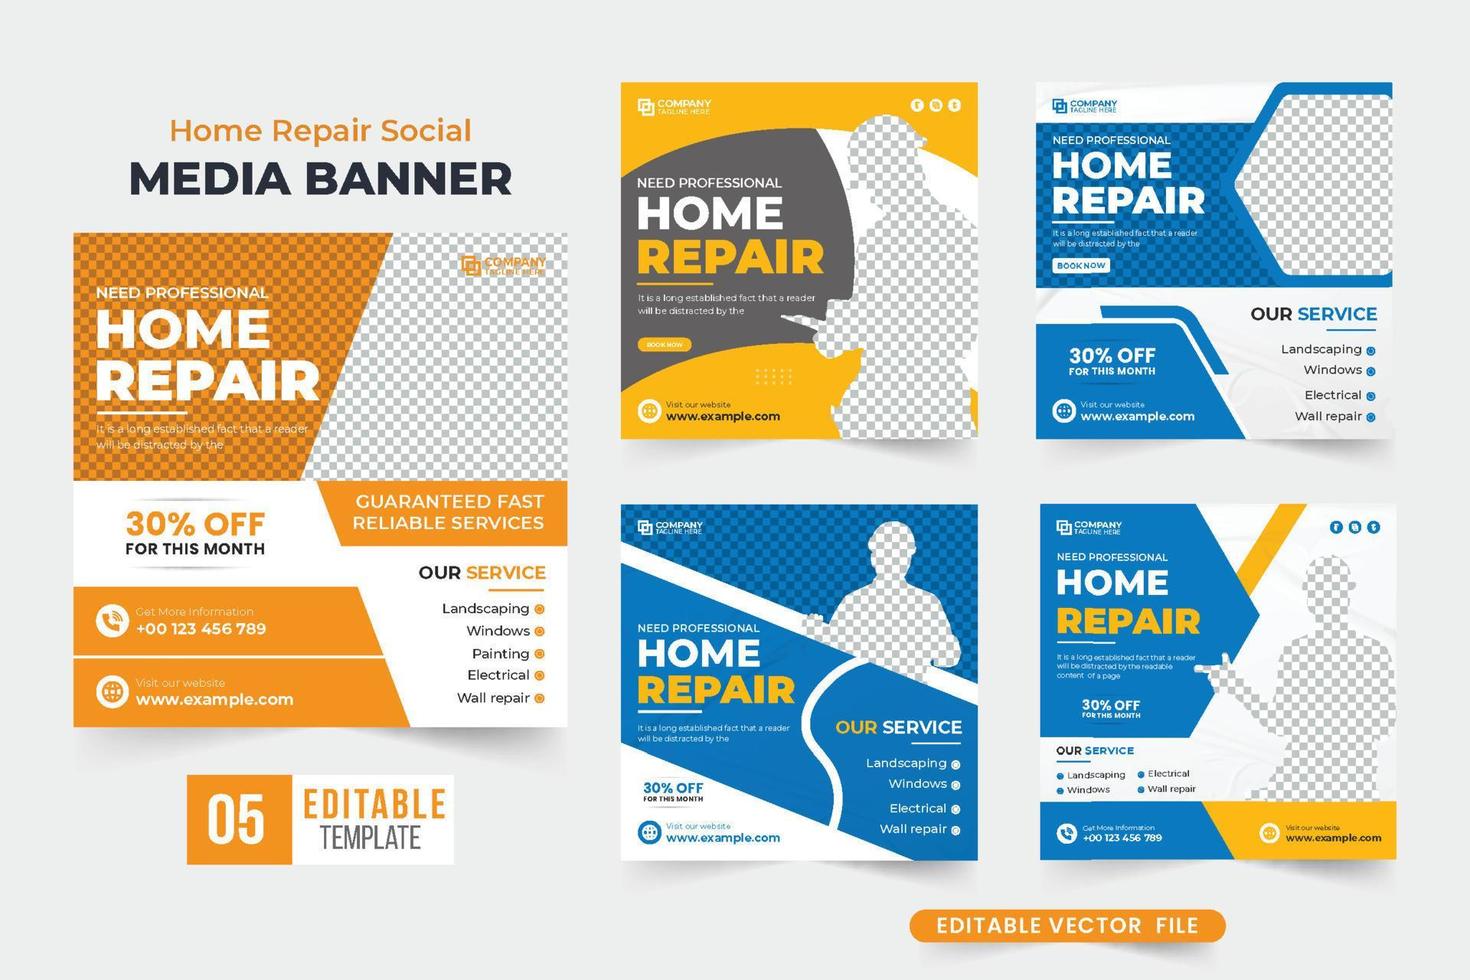 Home renovation service web banner collection for online marketing. Real estate house construction business advertisement poster bundle with blue and yellow colors. Home repair social media post set. vector